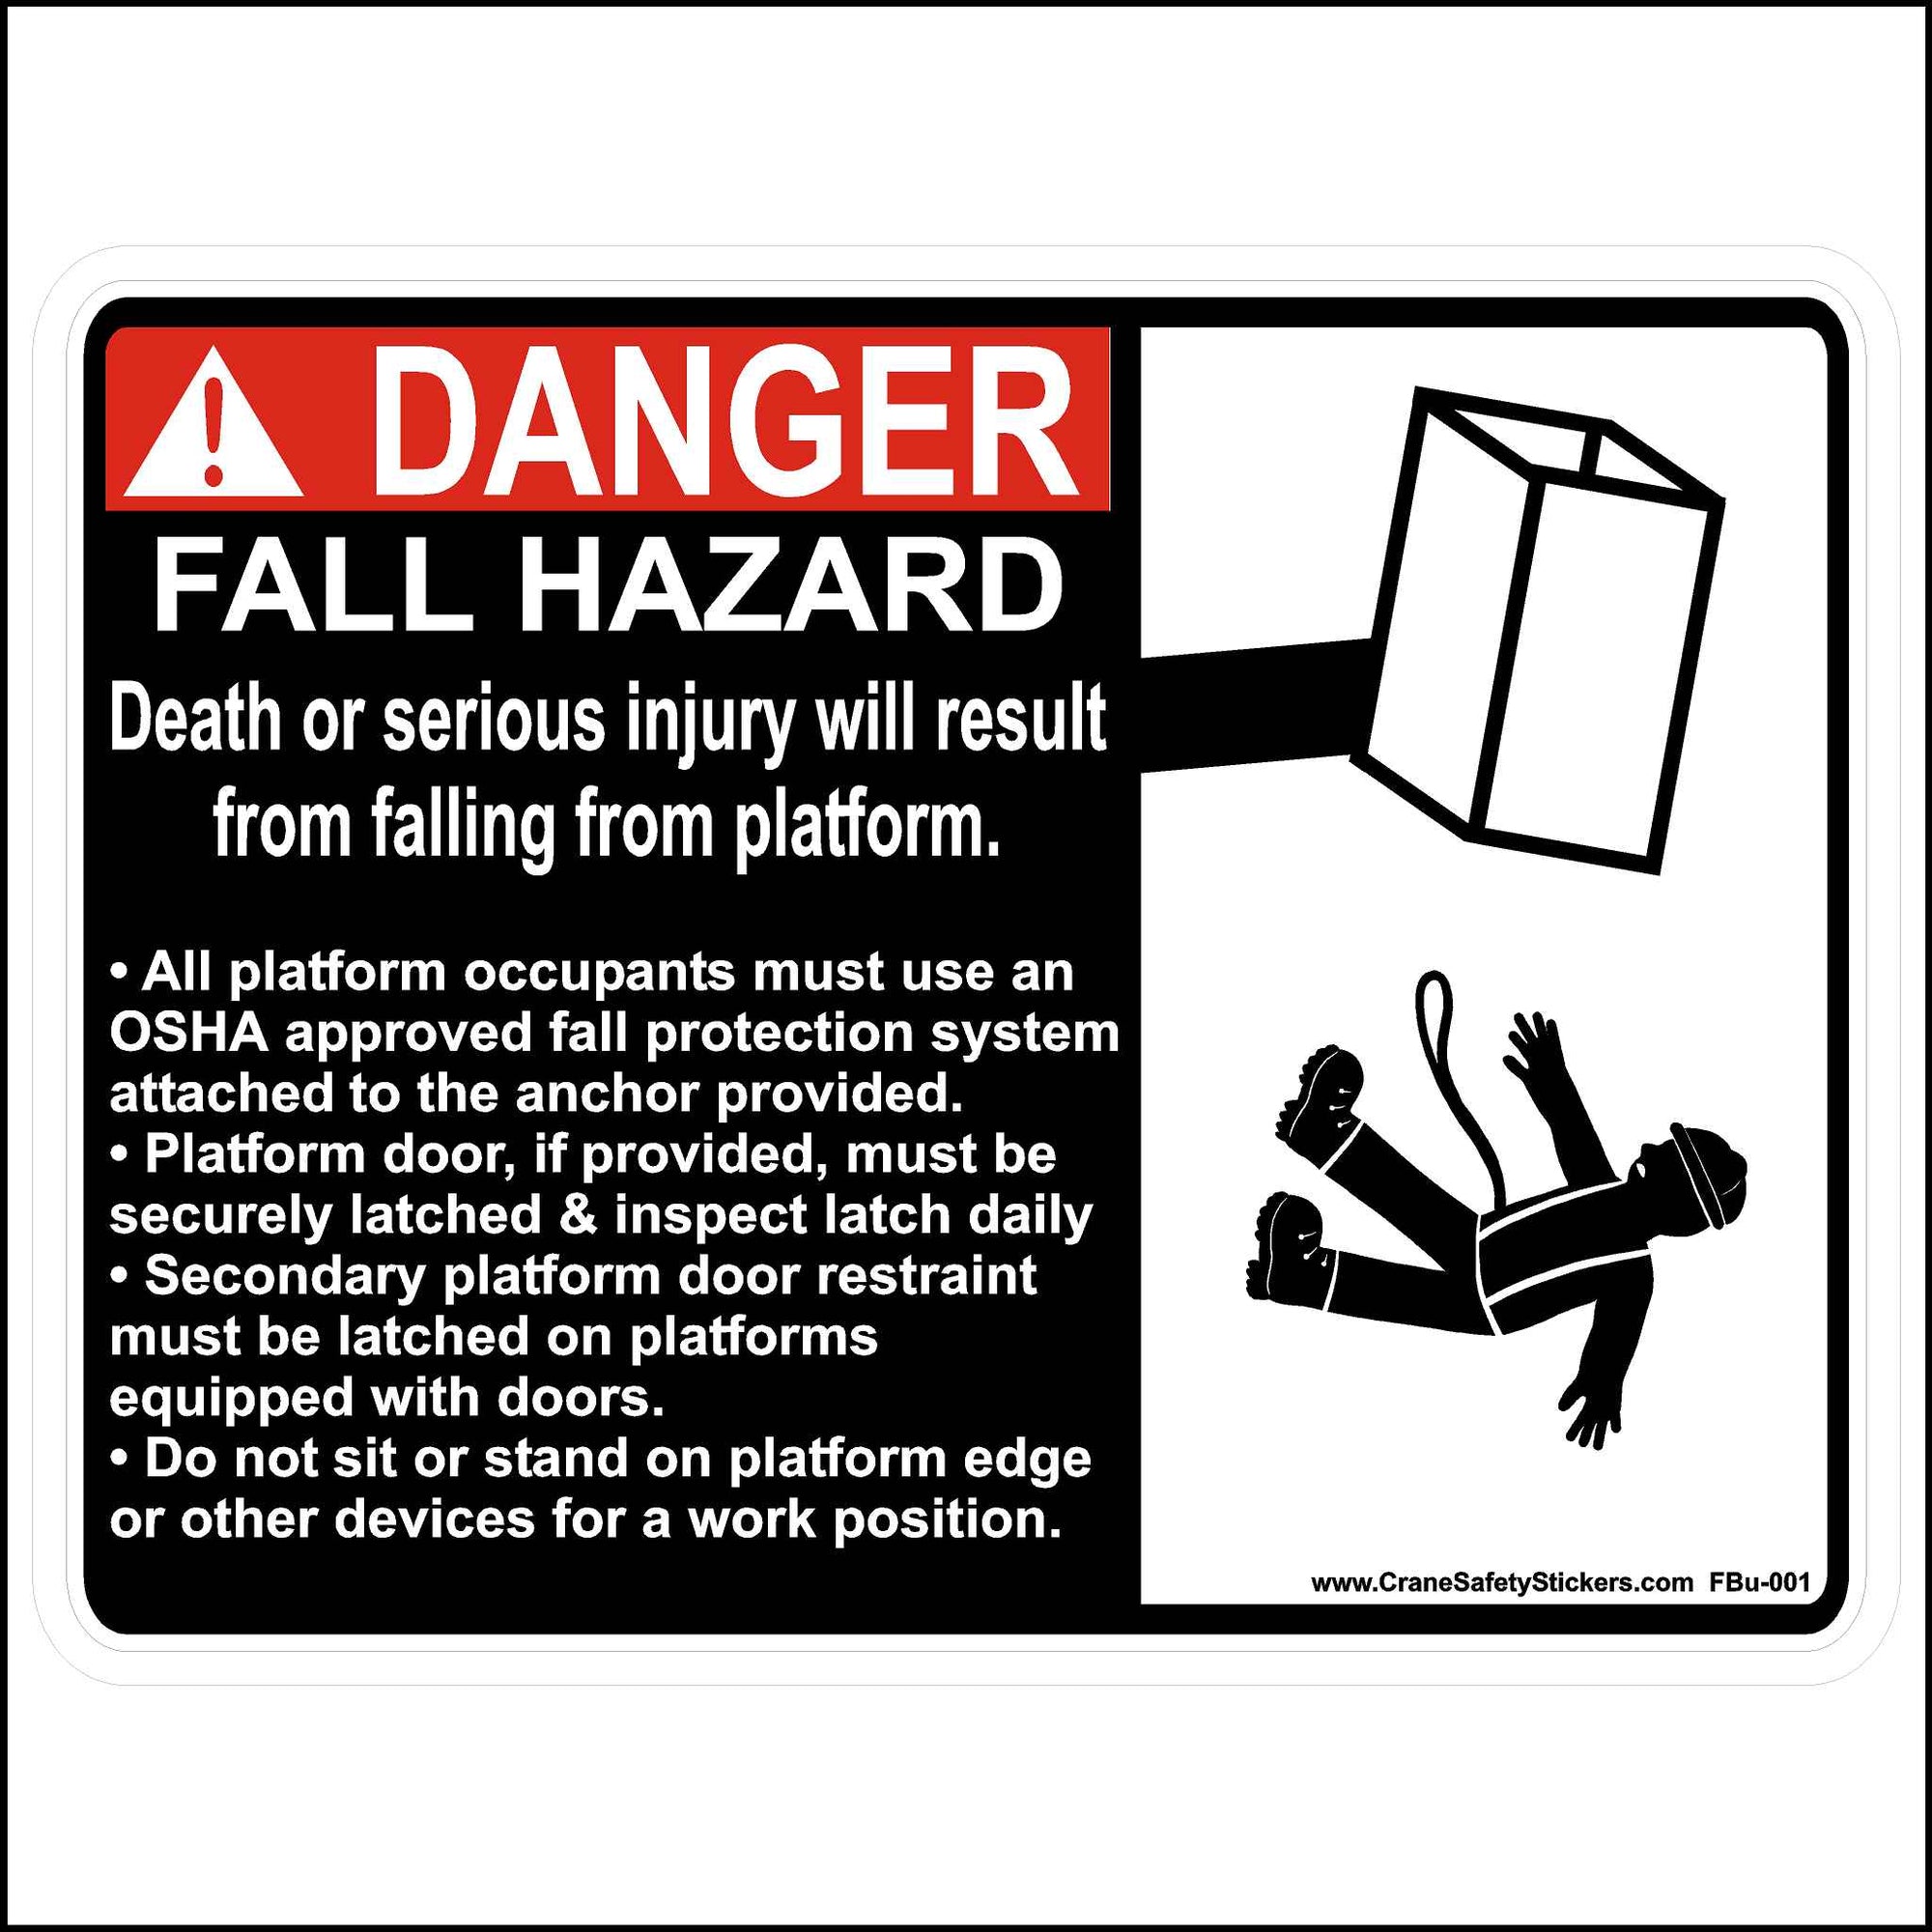 Bucket Truck Platform Warning Hazard Sticker Printed with, DANGER Fall Hazard, Death, Or Serious Injury Will Result From Falling From Platform.  • All platform occupants must use an OSHA approved fall protection system attached to the anchor provided. • Platform door, if provided, must be securely latched & inspect latch daily • Secondary platform door restraints must be latched on platforms equipped with doors. • Do not sit or stand on platform edge or other devices for a work position.